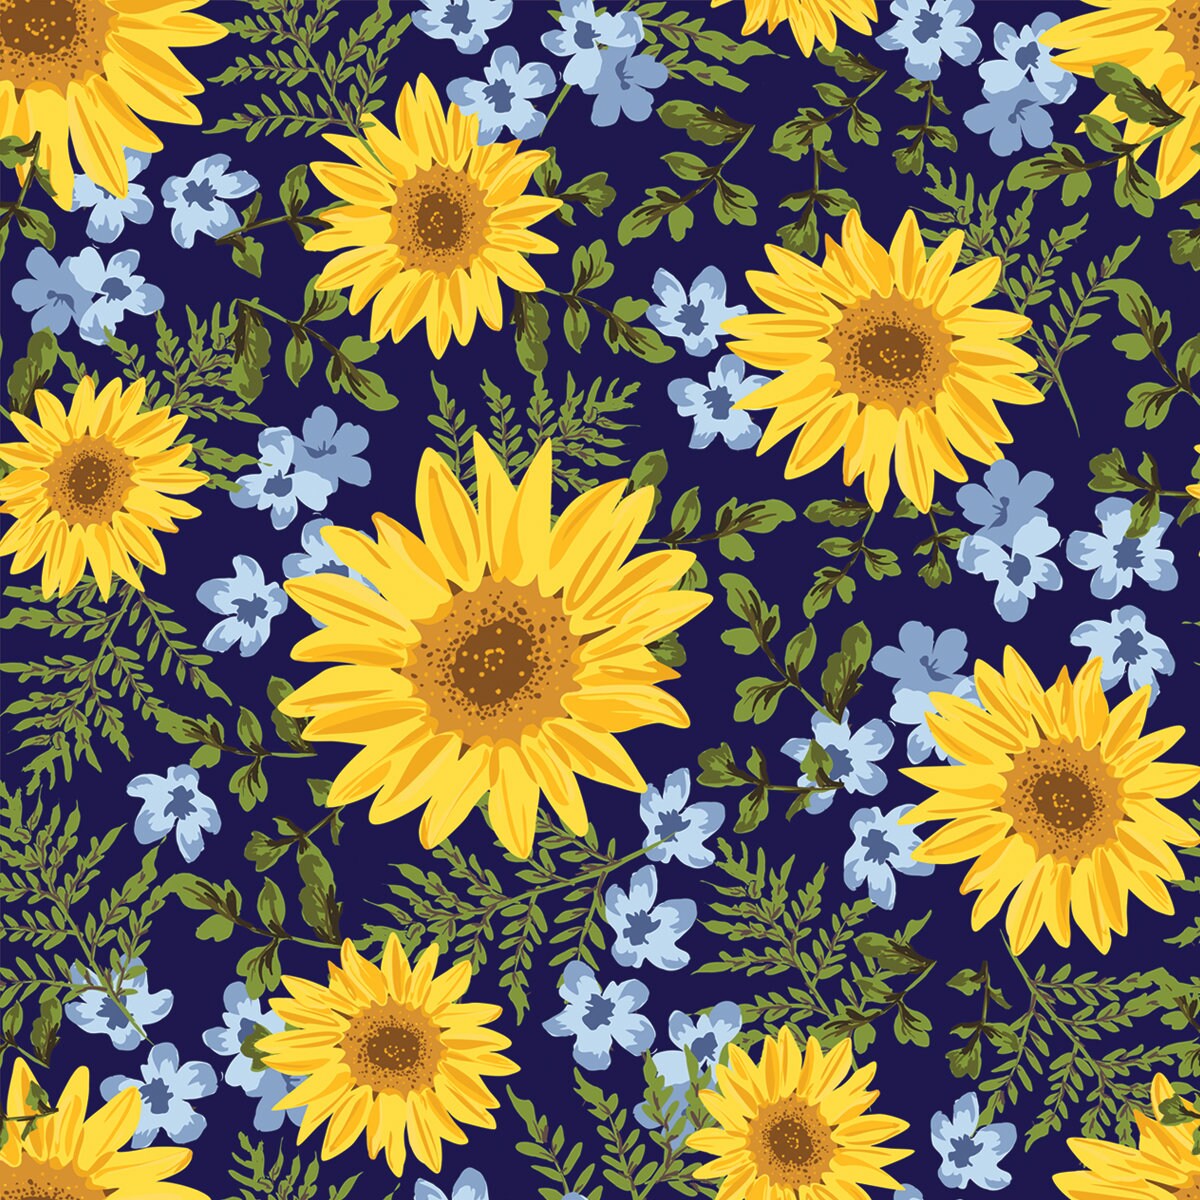 Seamless Pattern with Sunflowers on Navy Background. Ditsy Decorative Floral Design and Foliage Wallpaper Kitchen Mural